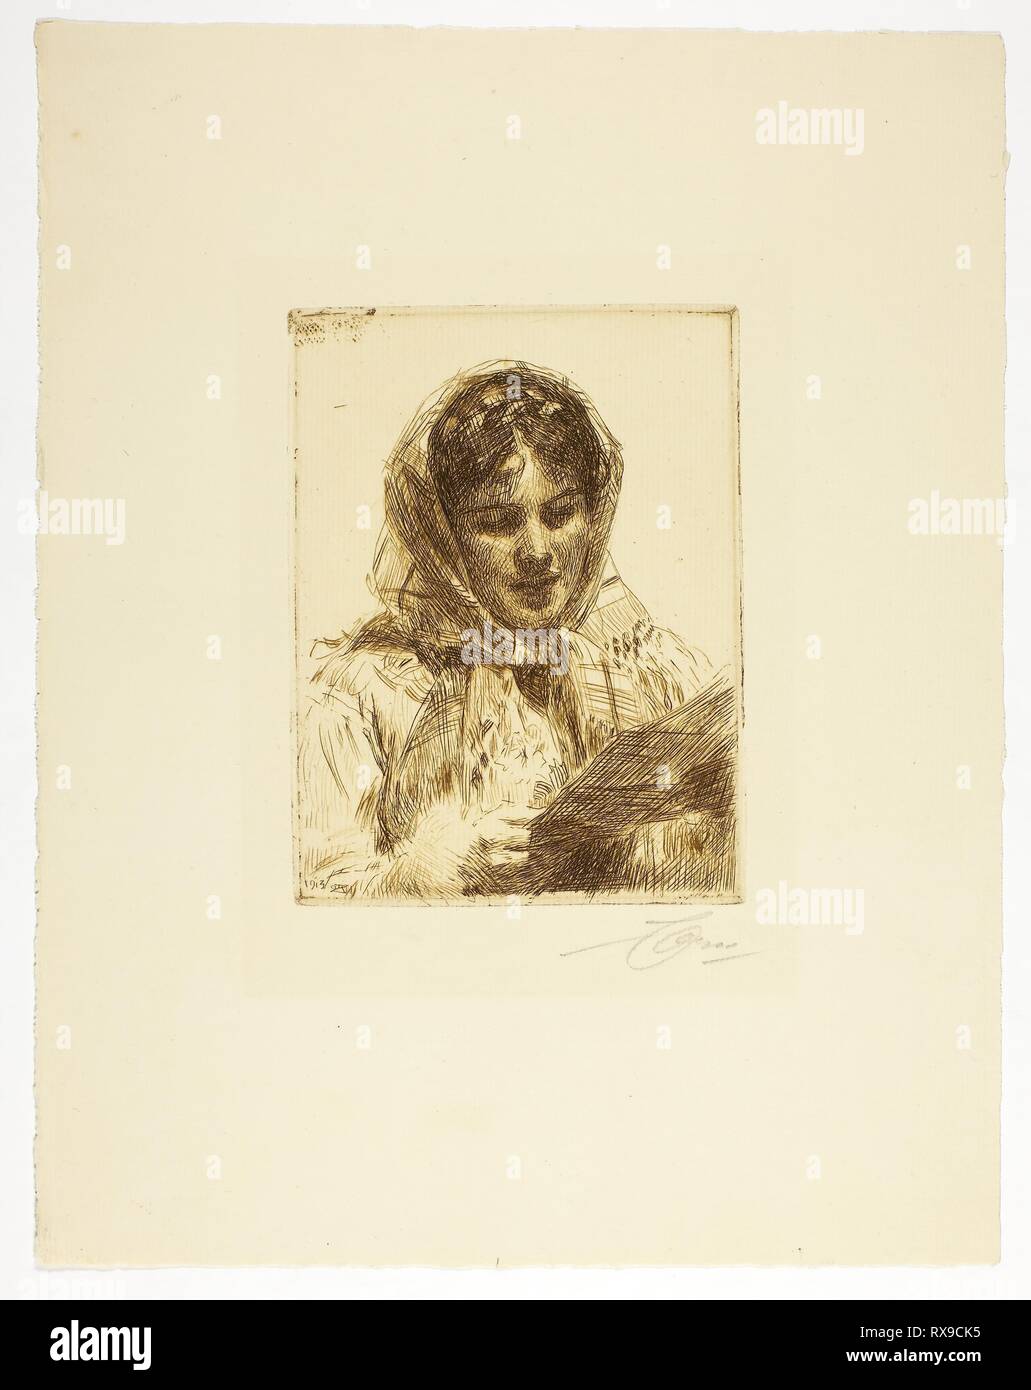 The Letter. Anders Zorn; Swedish, 1860-1920. Date: 1913. Dimensions: 158 x 120 mm (image/plate); 328 x 256 mm (sheet). Etching in black on ivory laid paper. Origin: Sweden. Museum: The Chicago Art Institute. Stock Photo